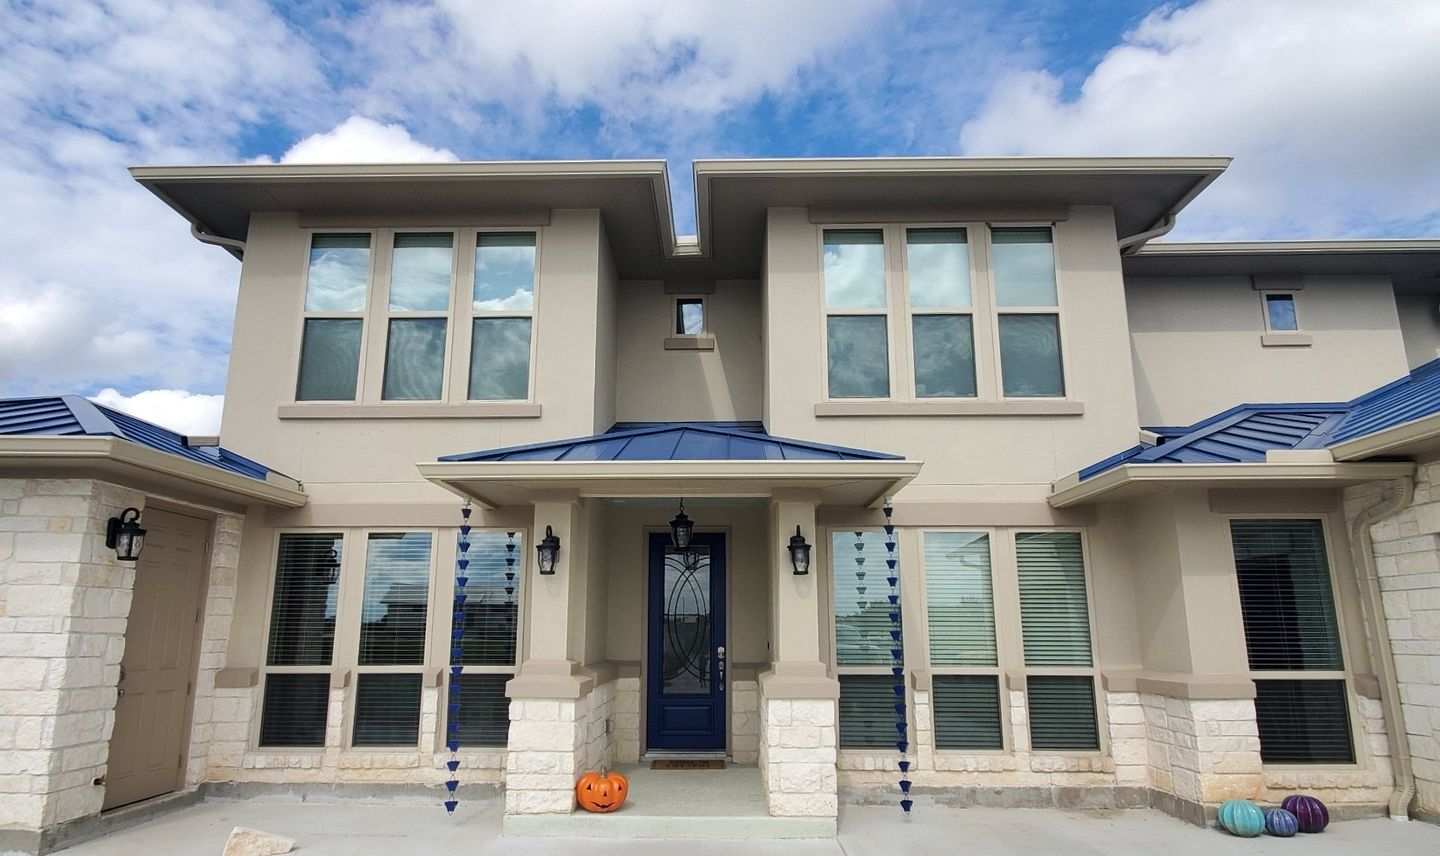 rain gutter installation in Austin with blue rain chains to match blue metal roof